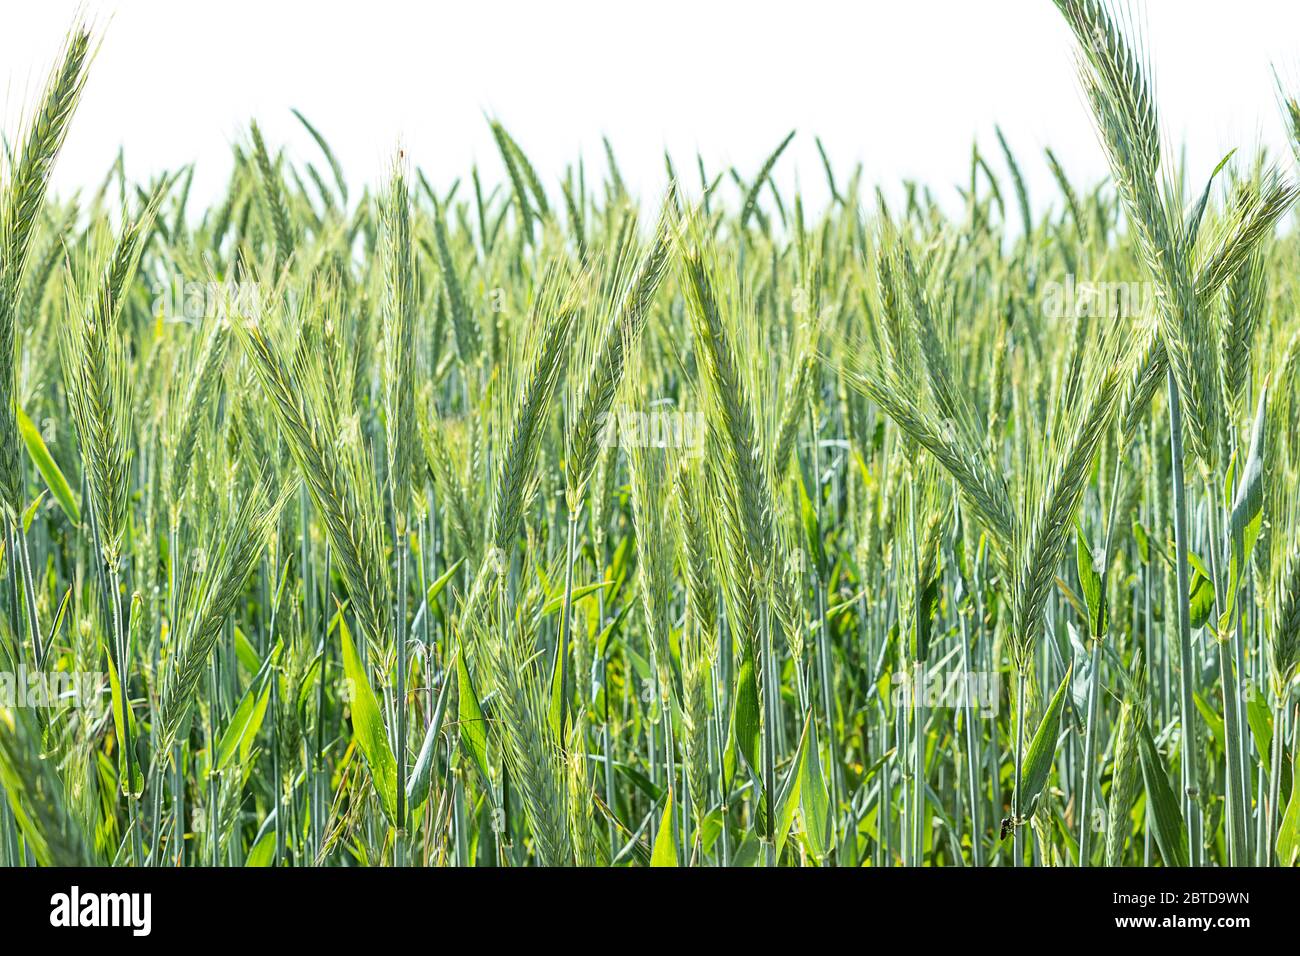 Young green barley crop in a field Stock Photo